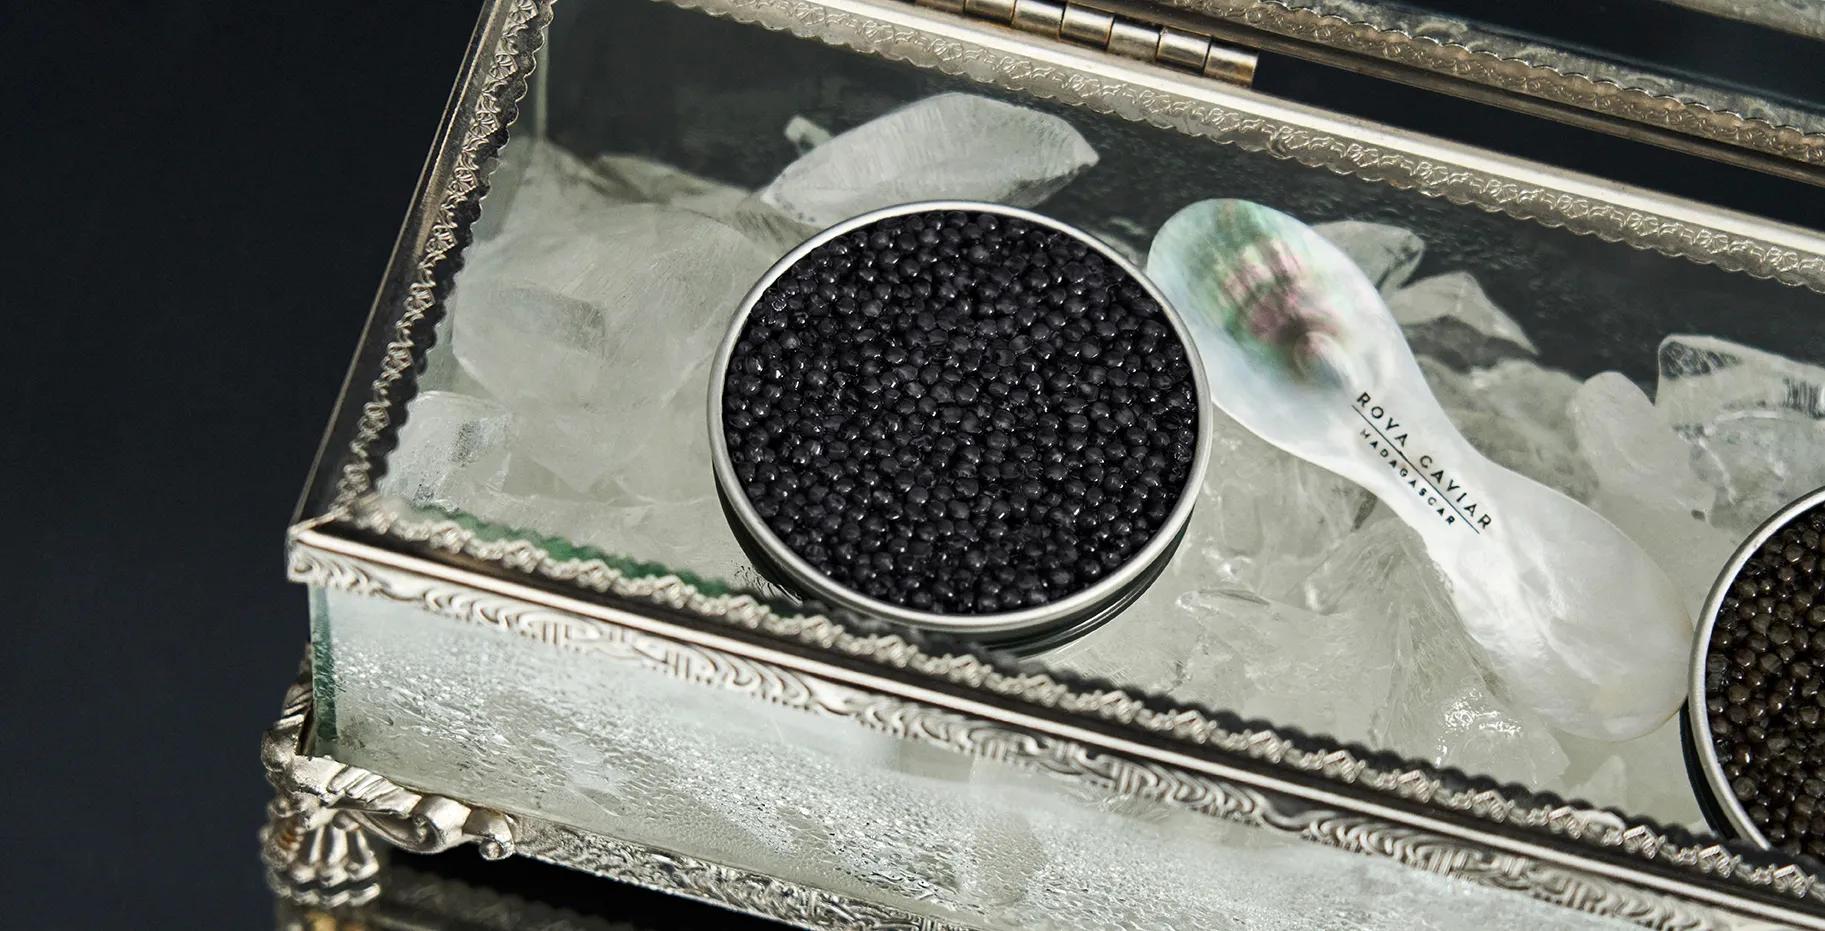 30g Caviar Box in a chest with a mother-of-pearl spoon